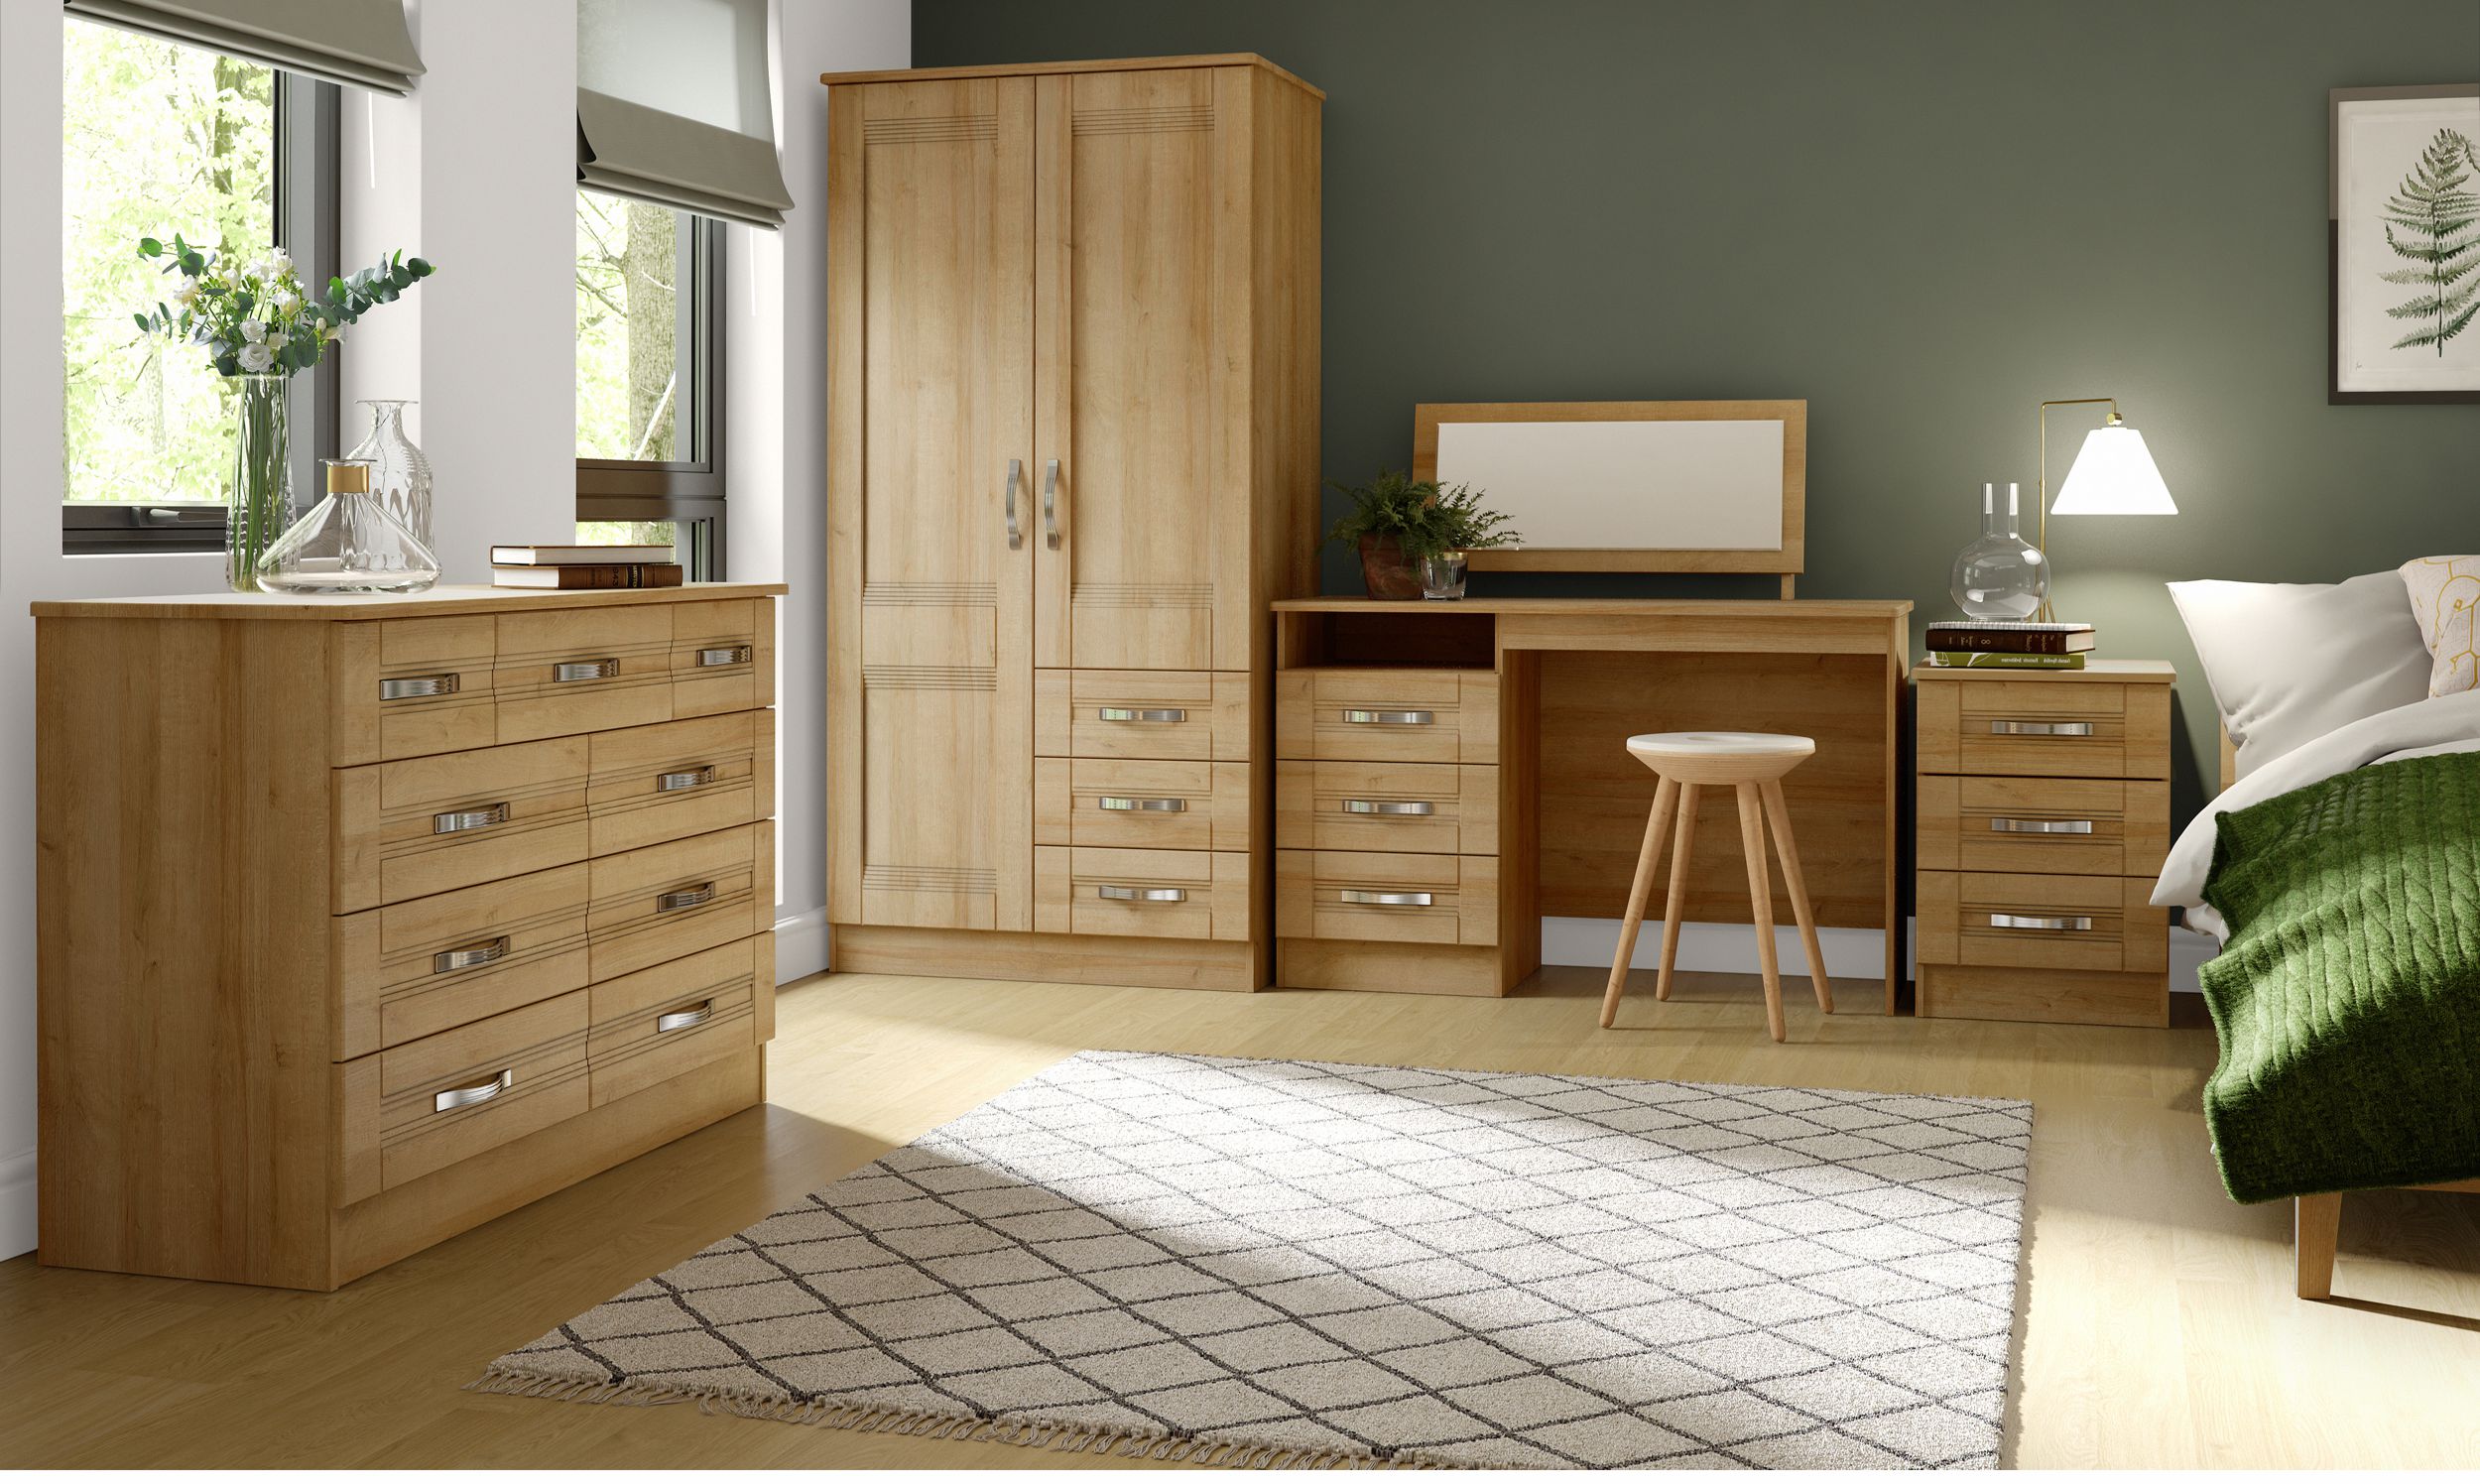 Arun Furnishers Ltd based in Littlehampton, West Sussex supply quality furniture for the home - bedroom furniture